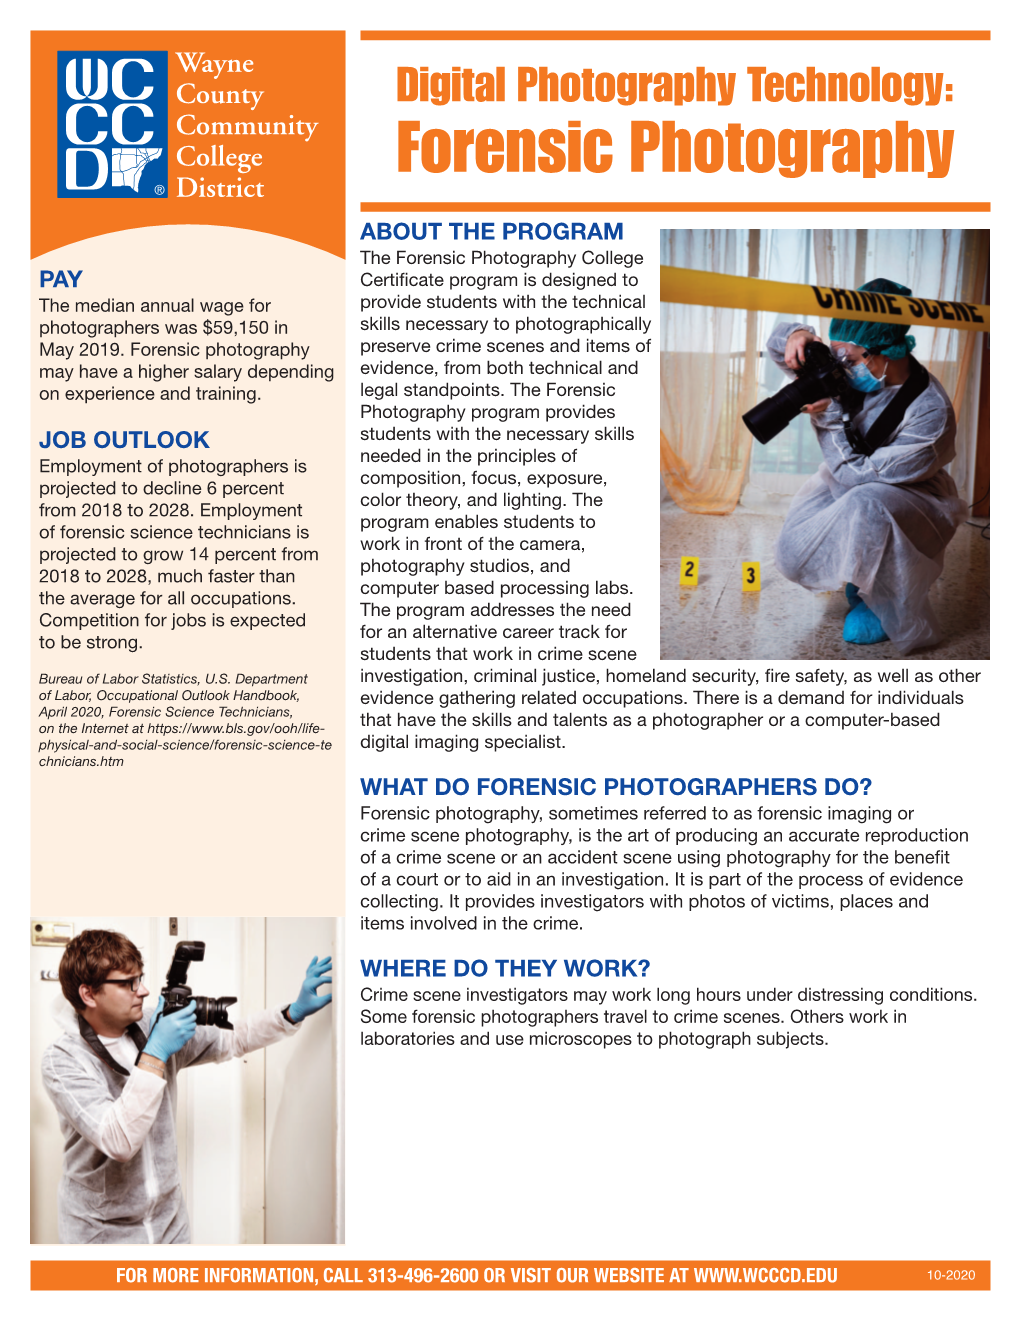 Forensic Photography